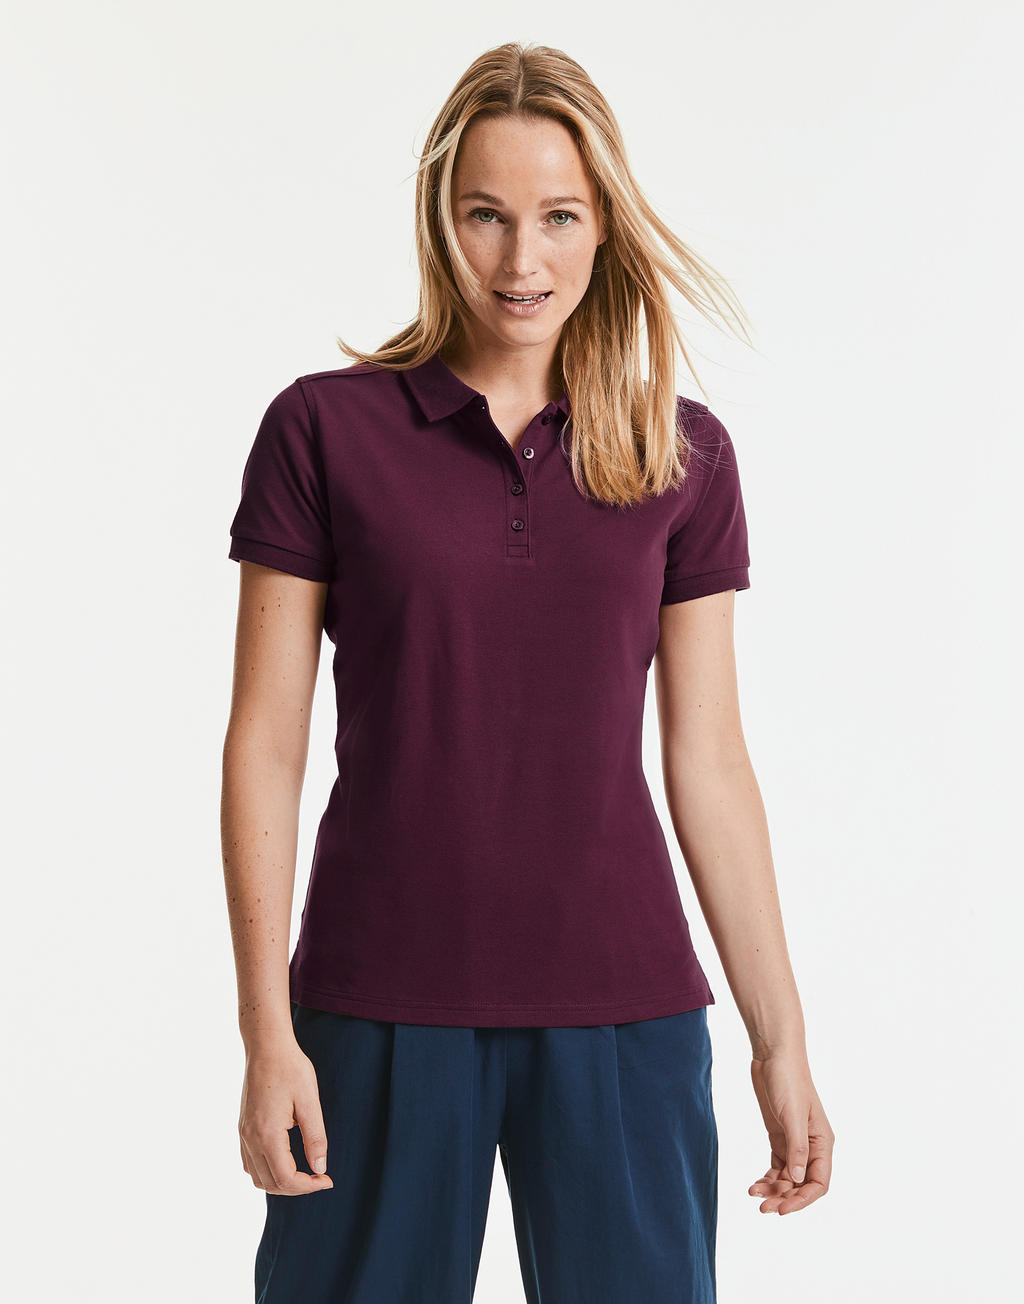 Ladies' Tailored Stretch Polo